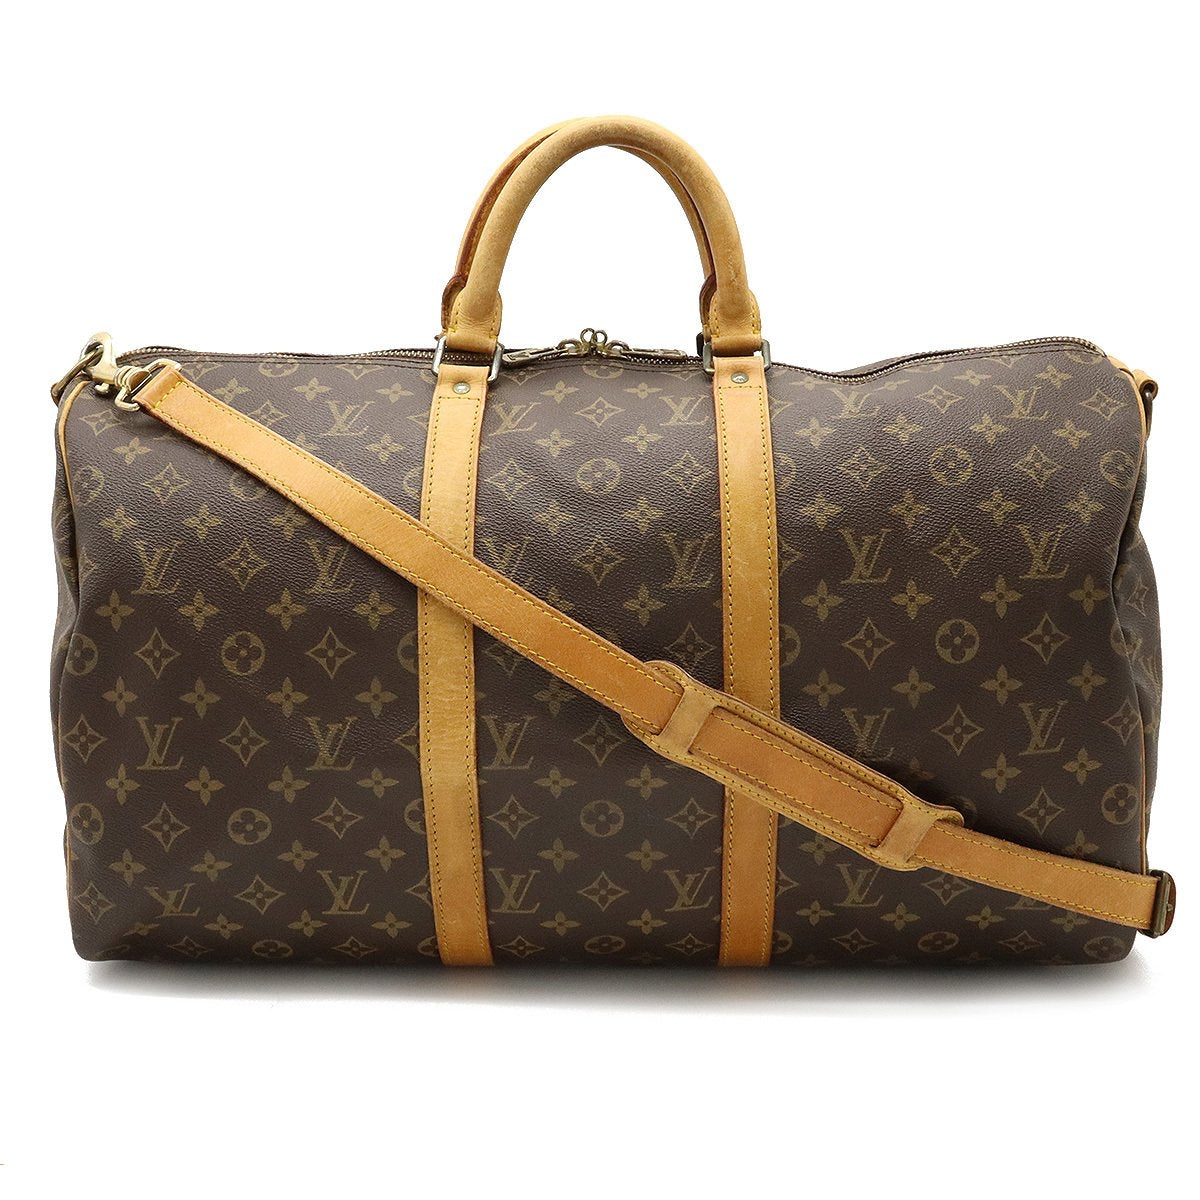 Louis Vuitton Keepall 50 Travel Bag in Gold EPI Leather